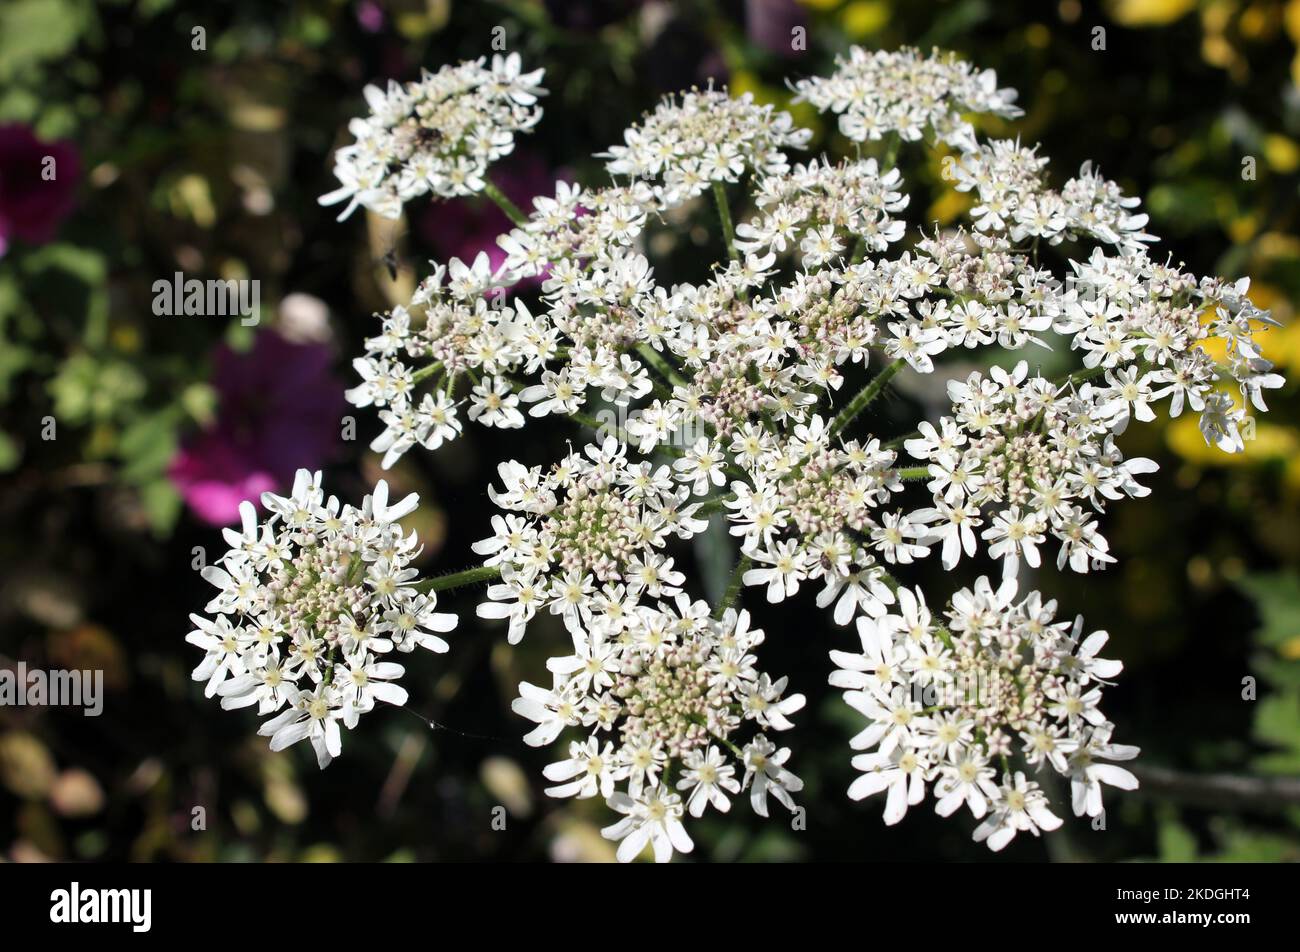 A spray of delicate white flowers on common native plant cow parsley ( Anthriscus sylvestris) Stock Photo